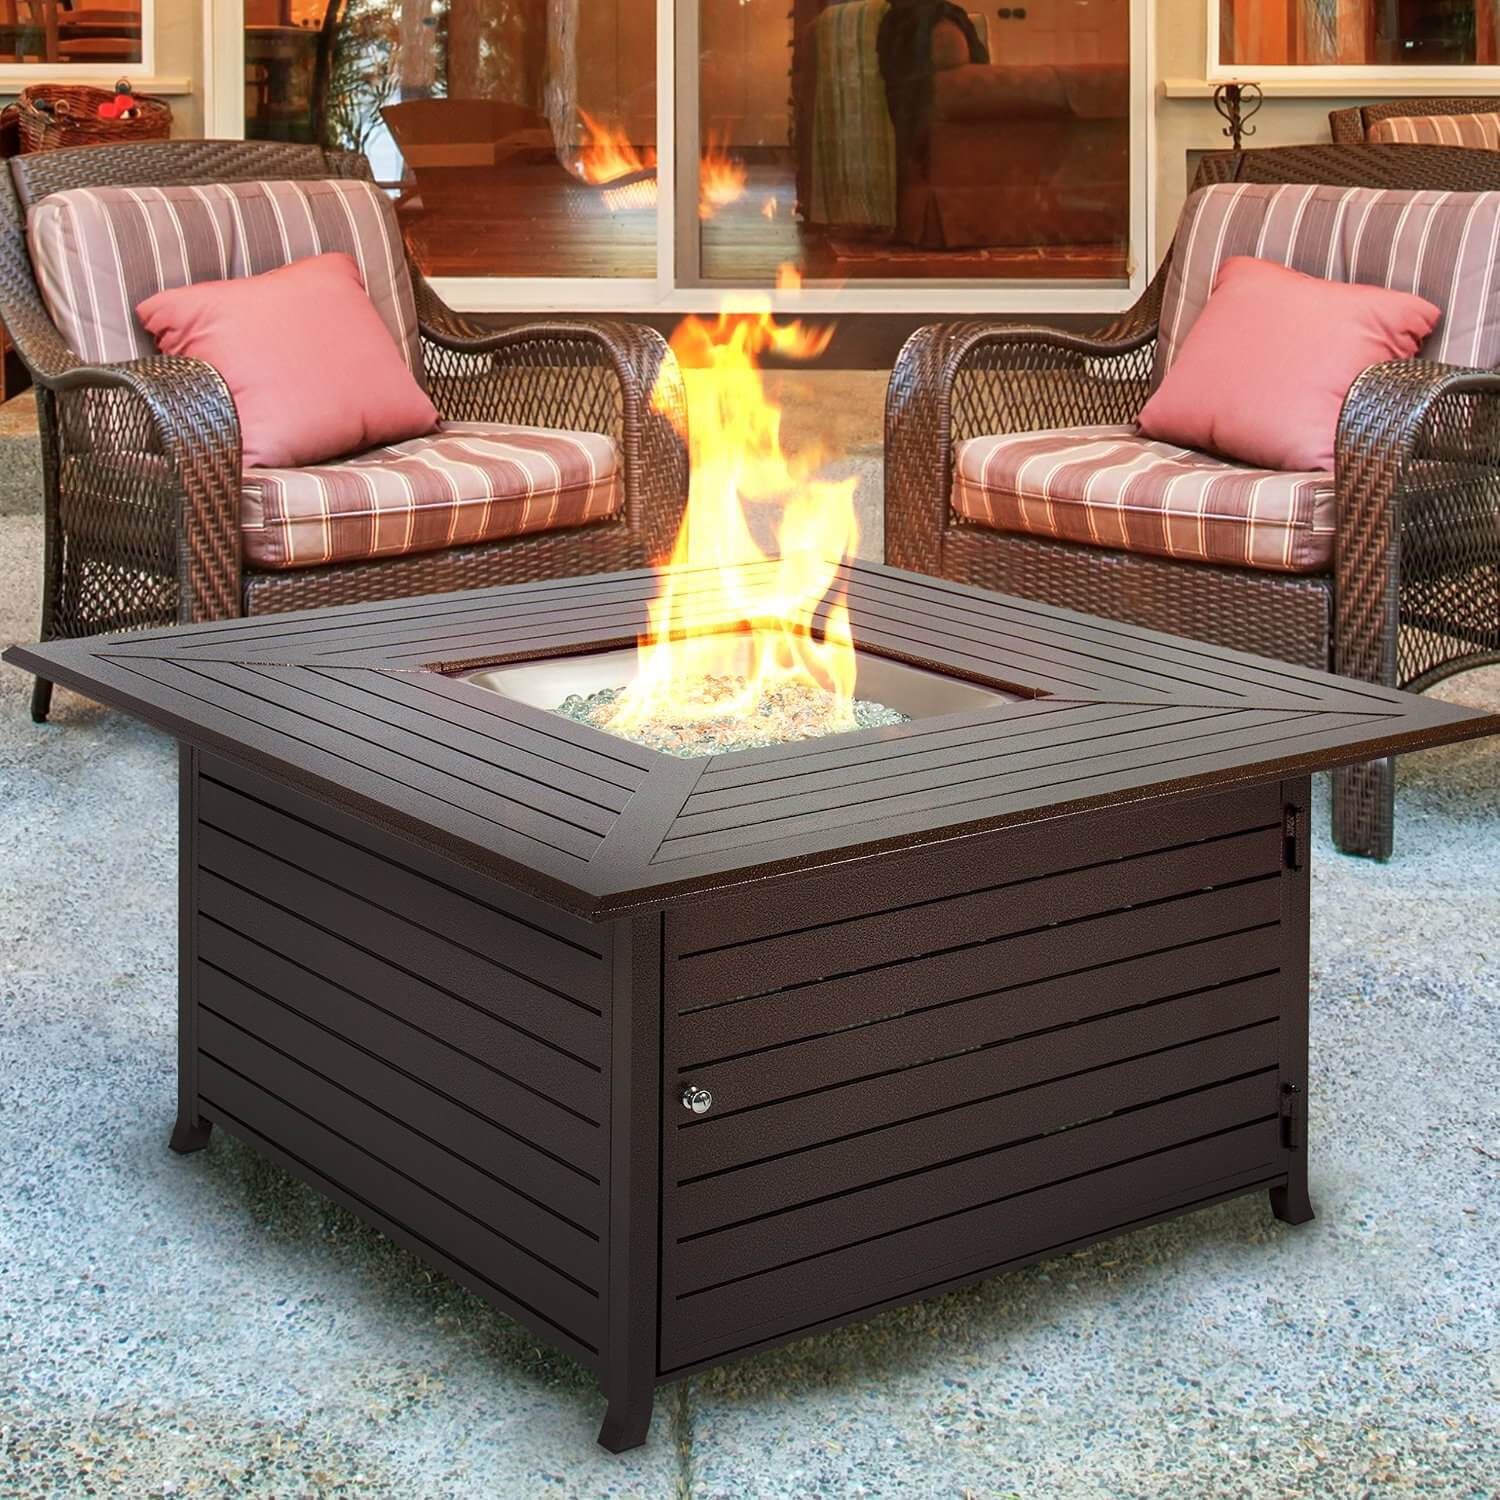 42 Backyard and Patio Fire Pit Ideas